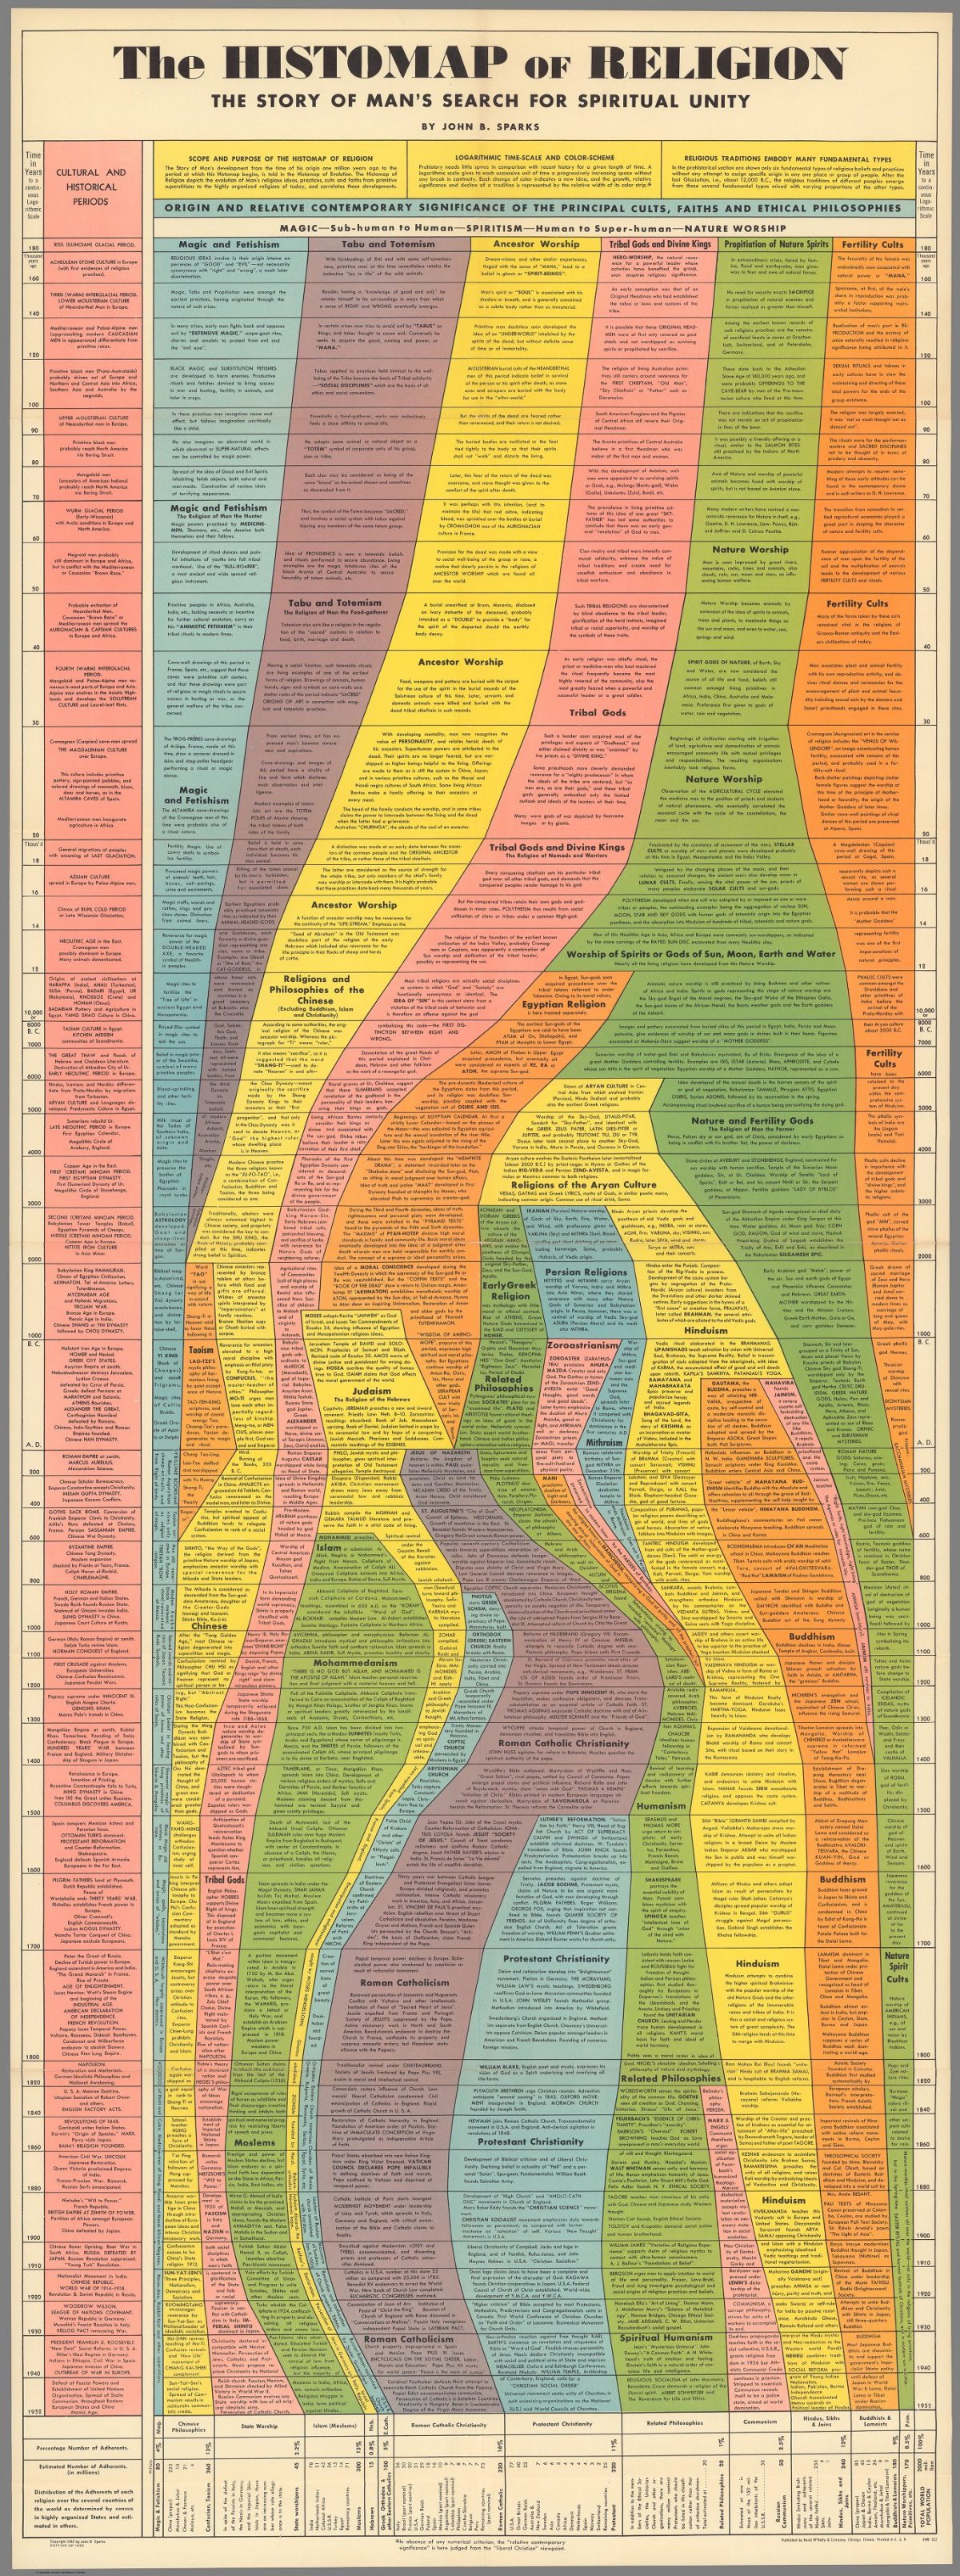 John Sparks' elongated chart from 1931: 'The Histomap'